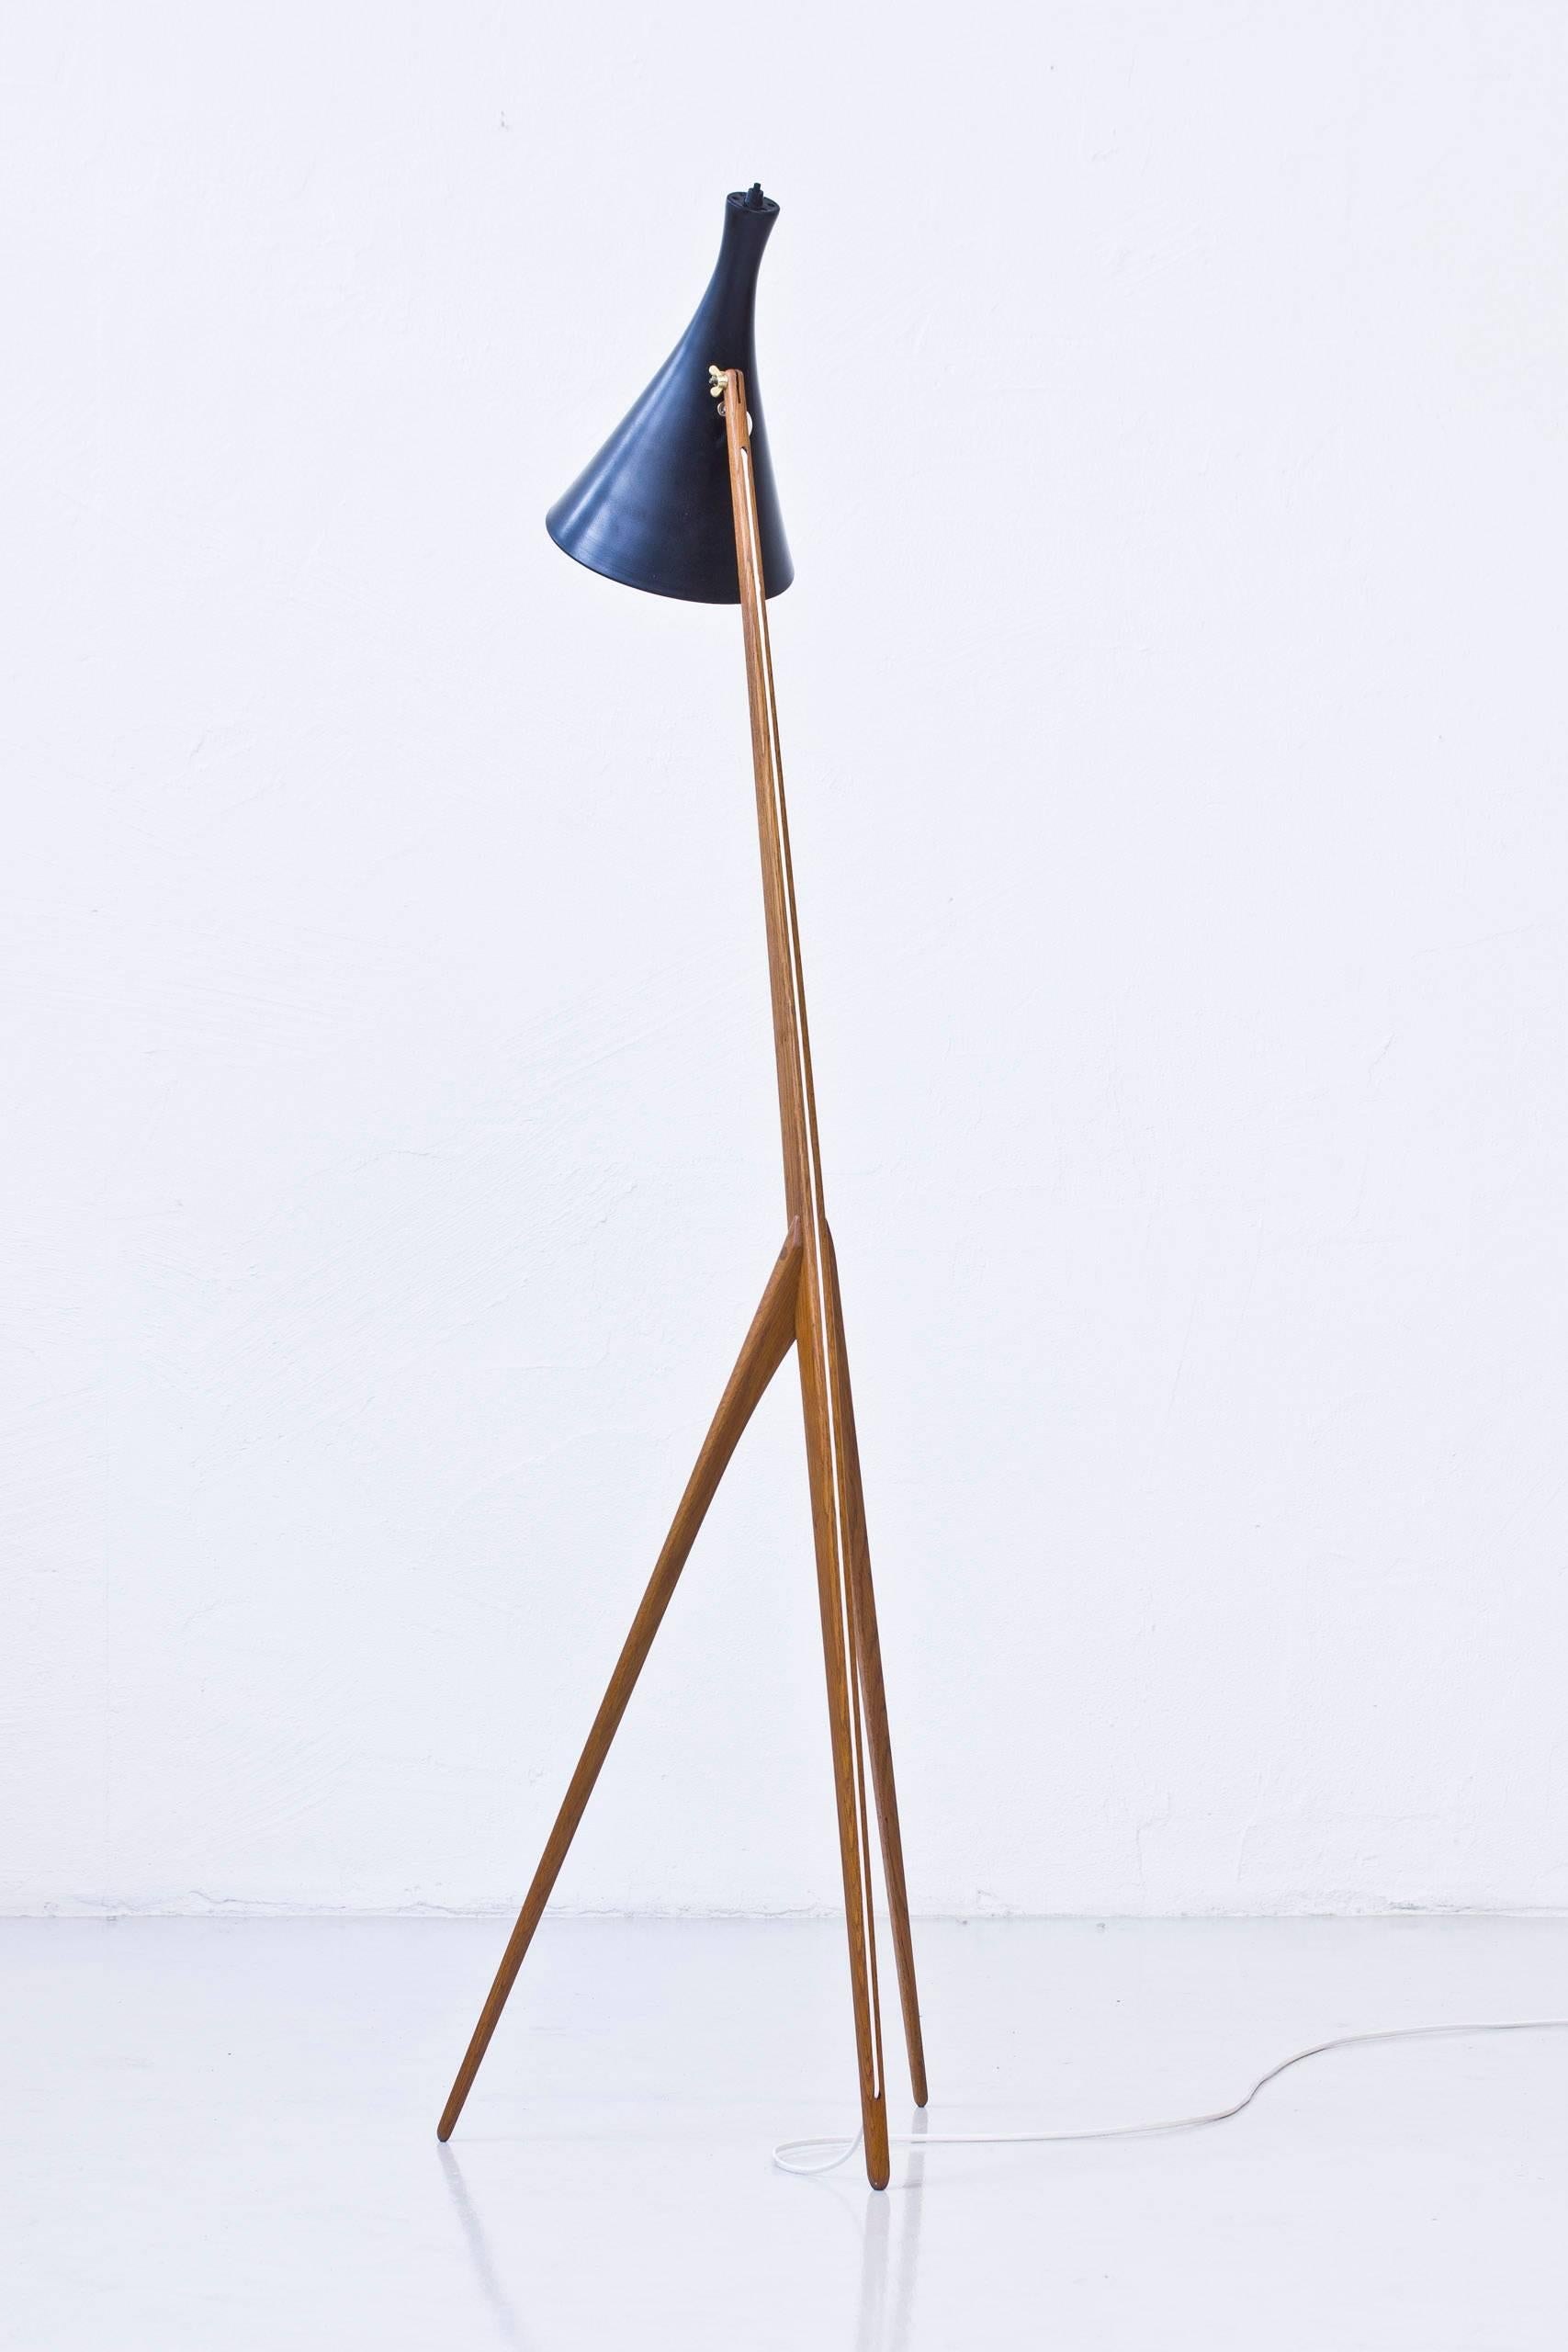 Rare floor lamp model Giraffe designed by Uno & Osten Kristiansson. Made by their own company Luxus in Vittsjo, Sweden during the 1950s. Solid oiled oak frame with brass details and aluminum shade in black and white lacquer. New chord. Light switch